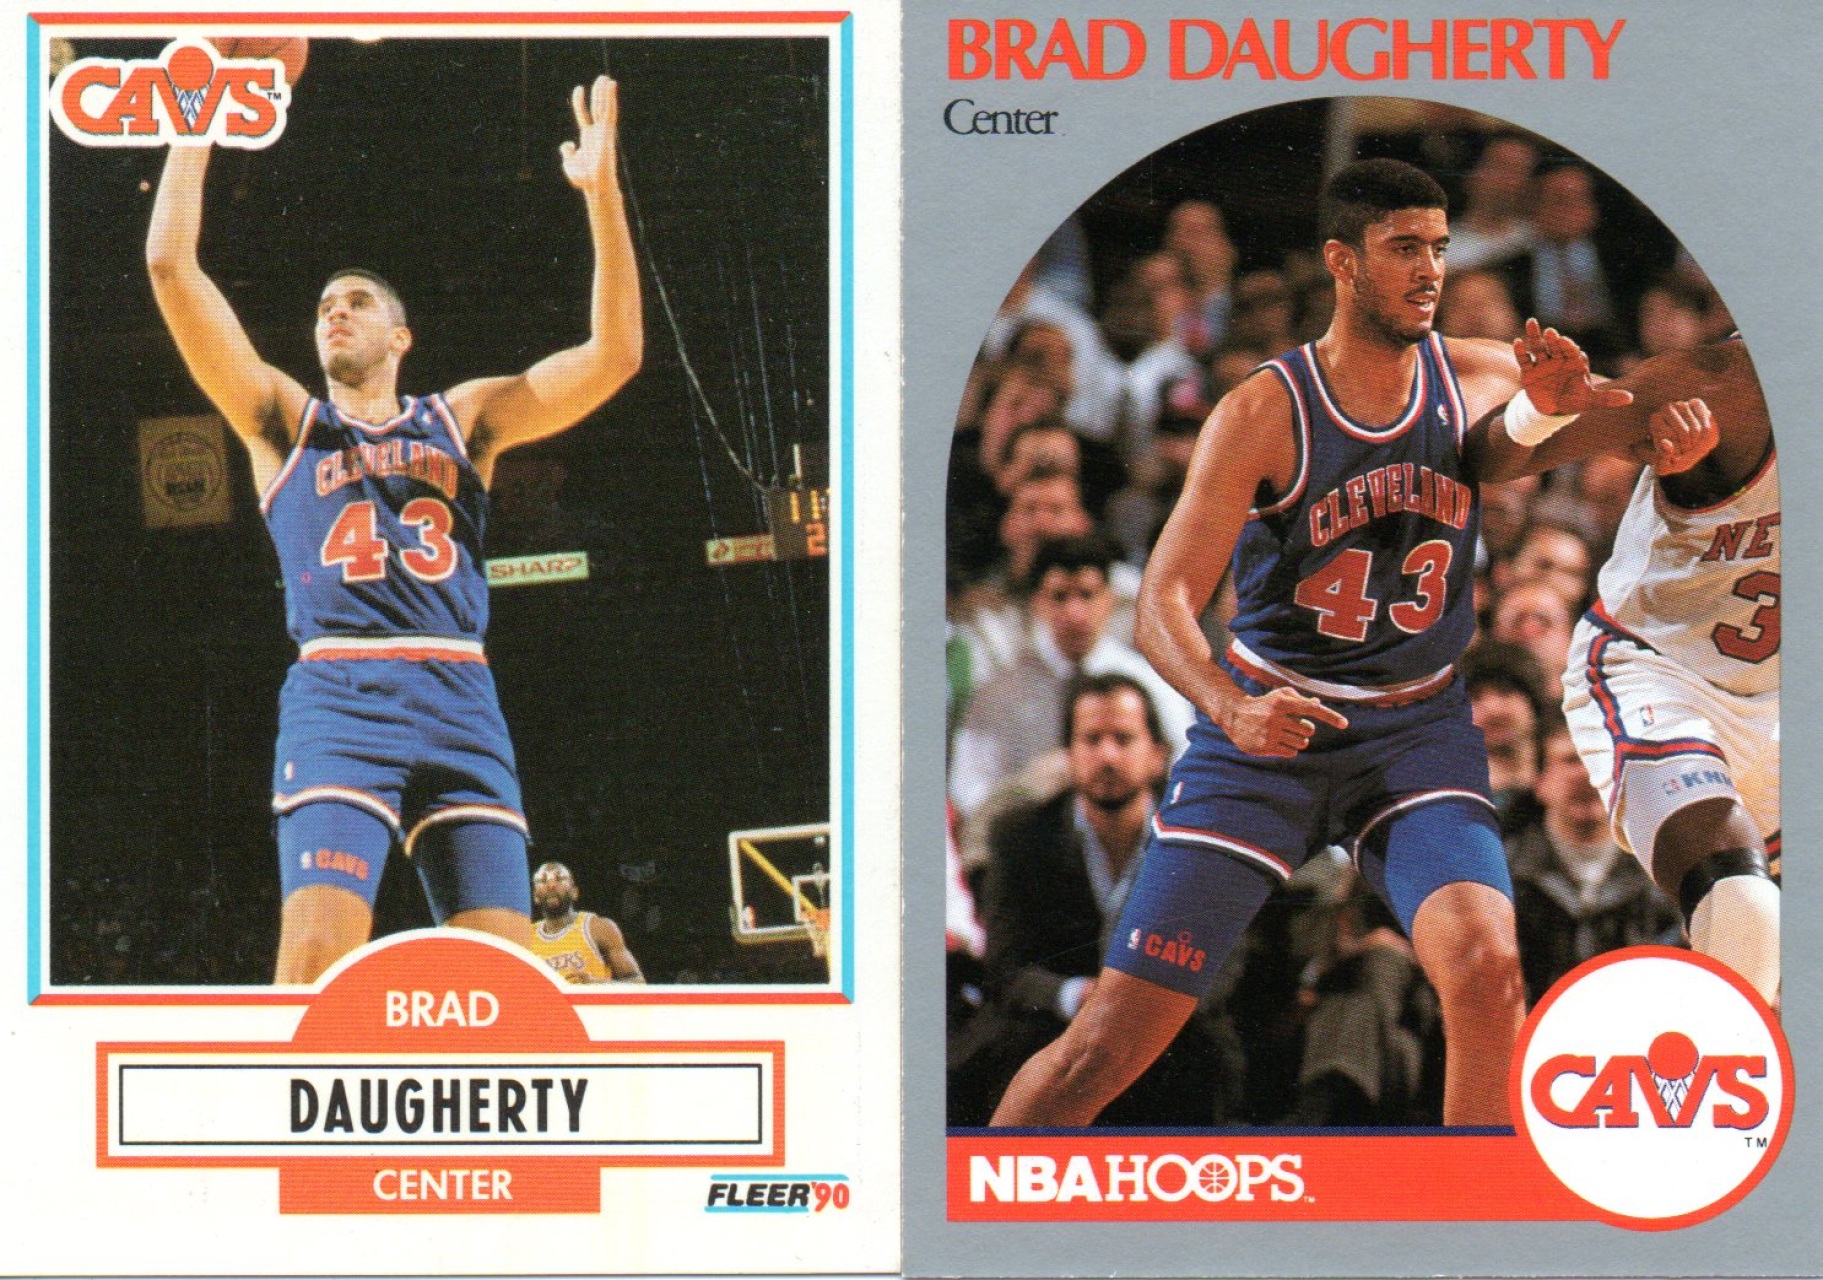  1989-90 Hoops Basketball #50 Brad Daugherty Cleveland Cavaliers  Official NBA Trading Card : Collectibles & Fine Art